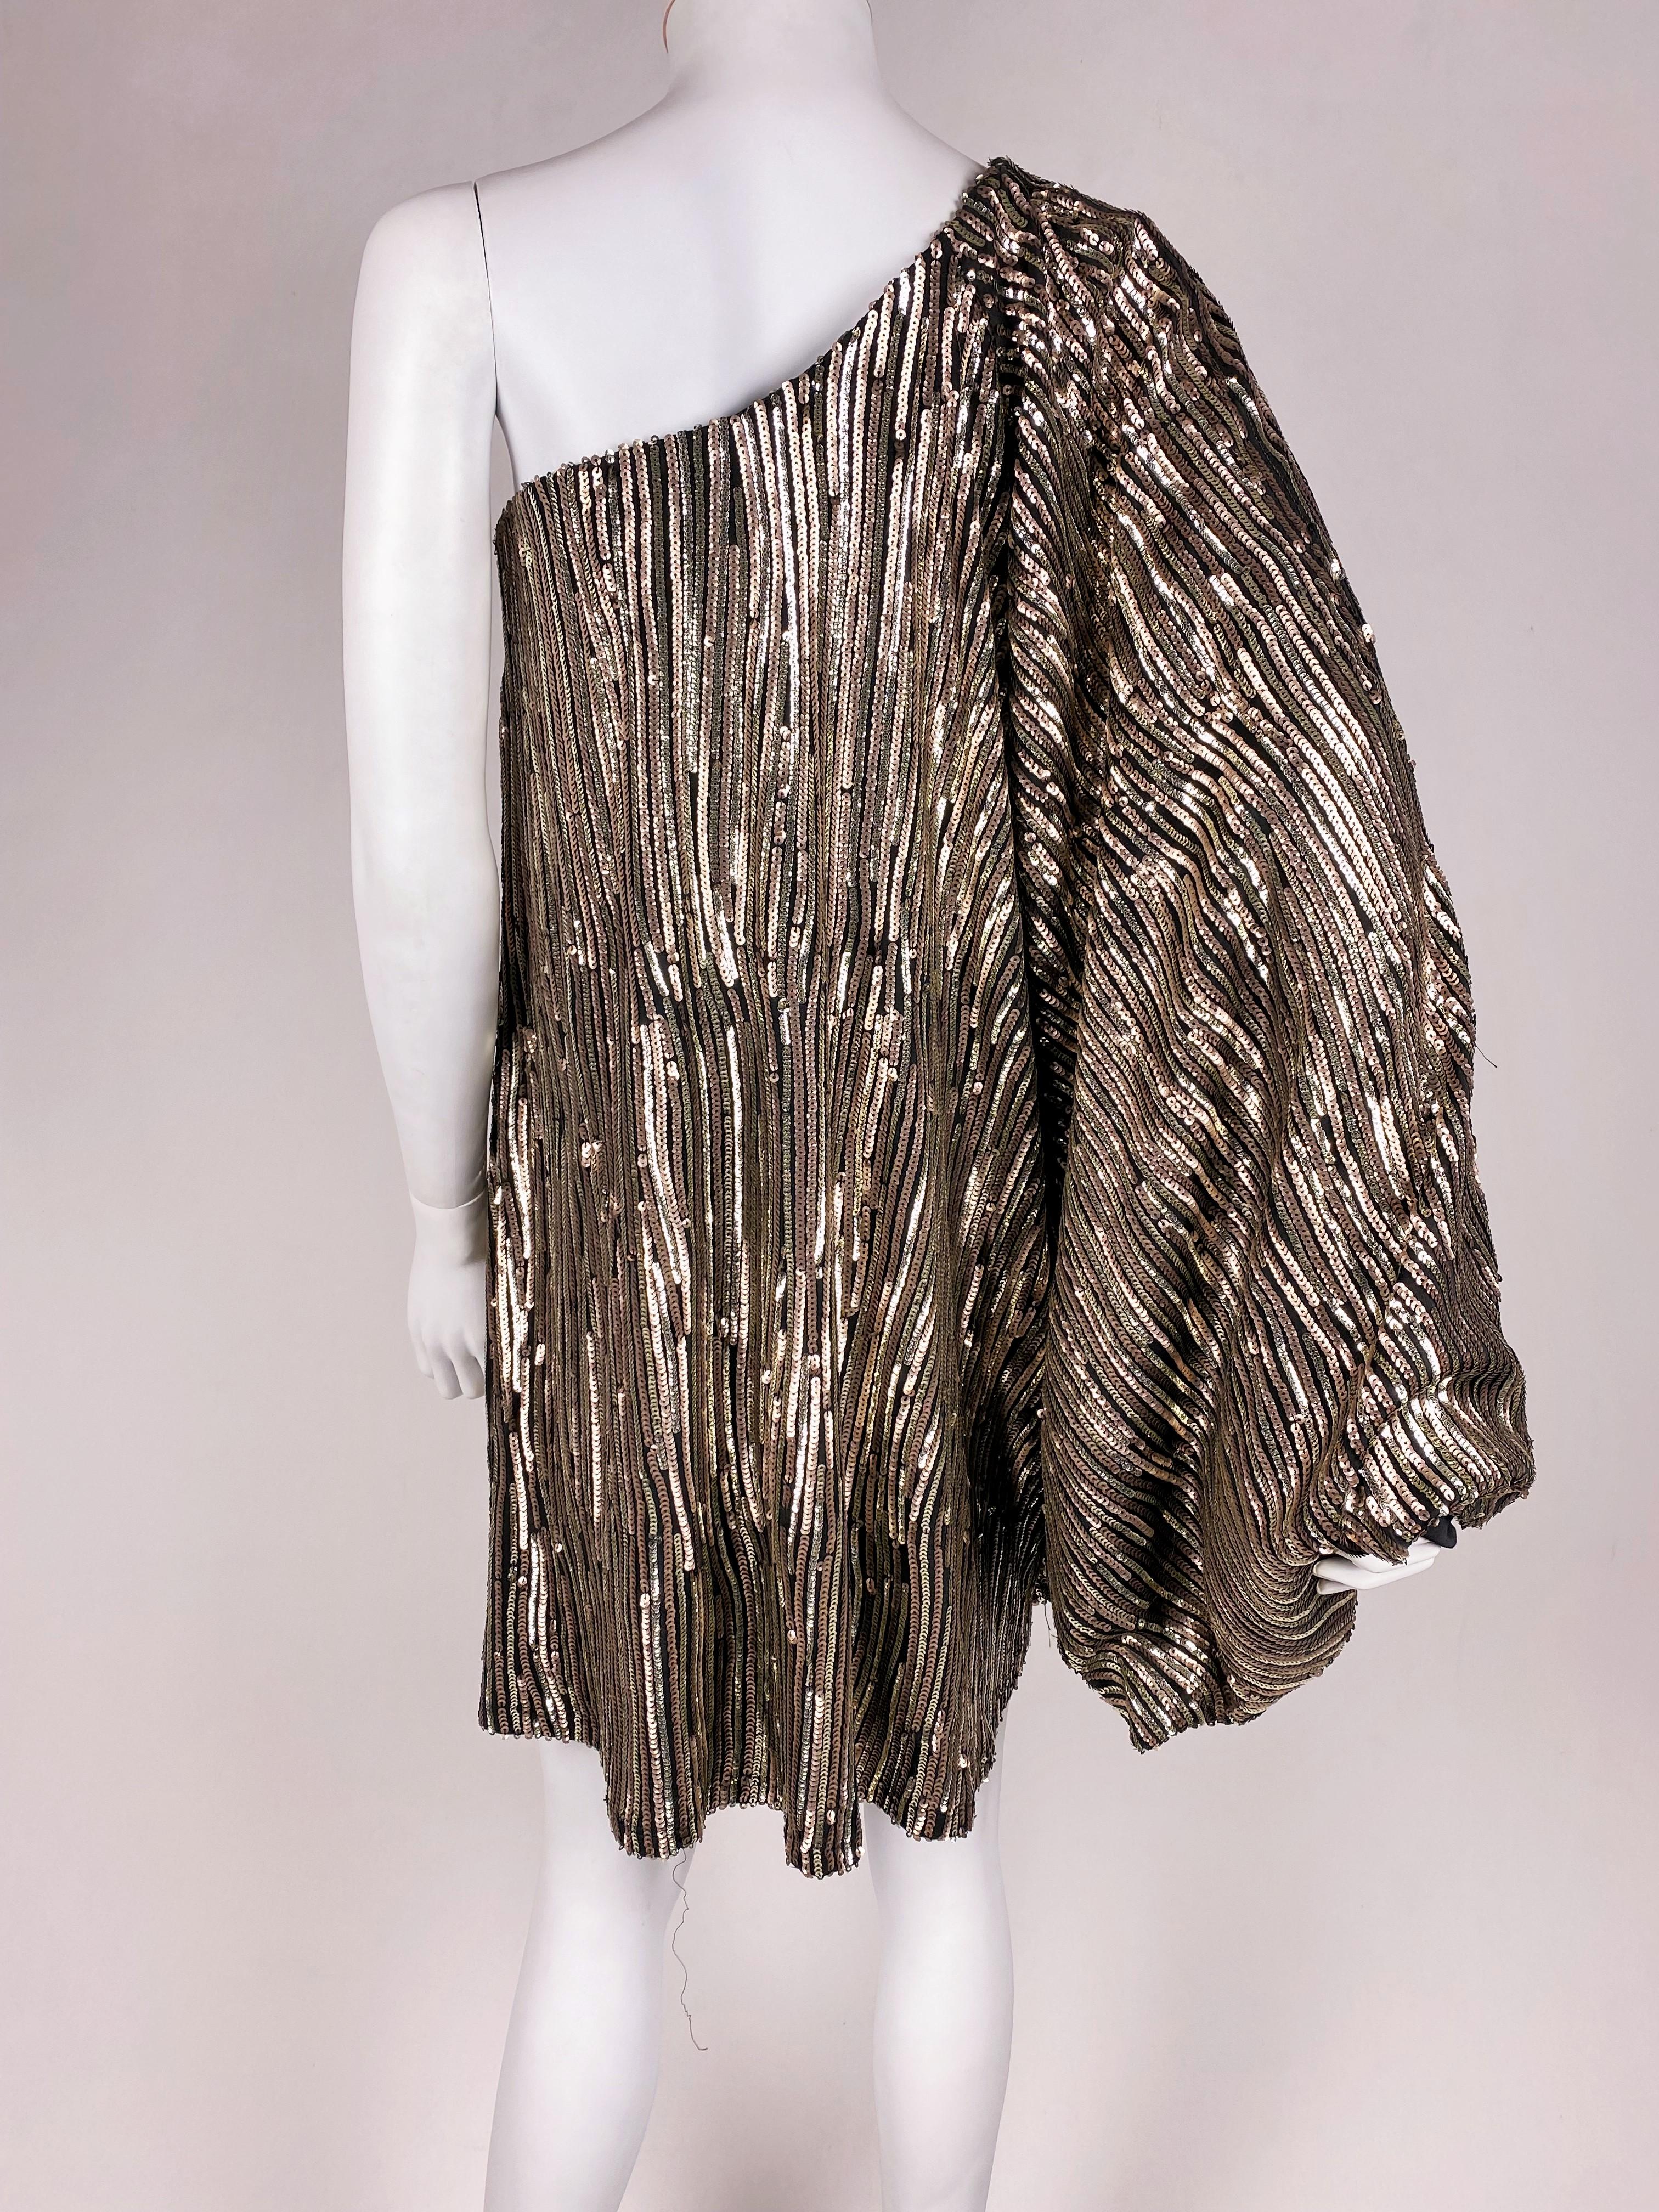 A Sequin top or mini-dress with bat handle For a Party - France Circa 1980 For Sale 9